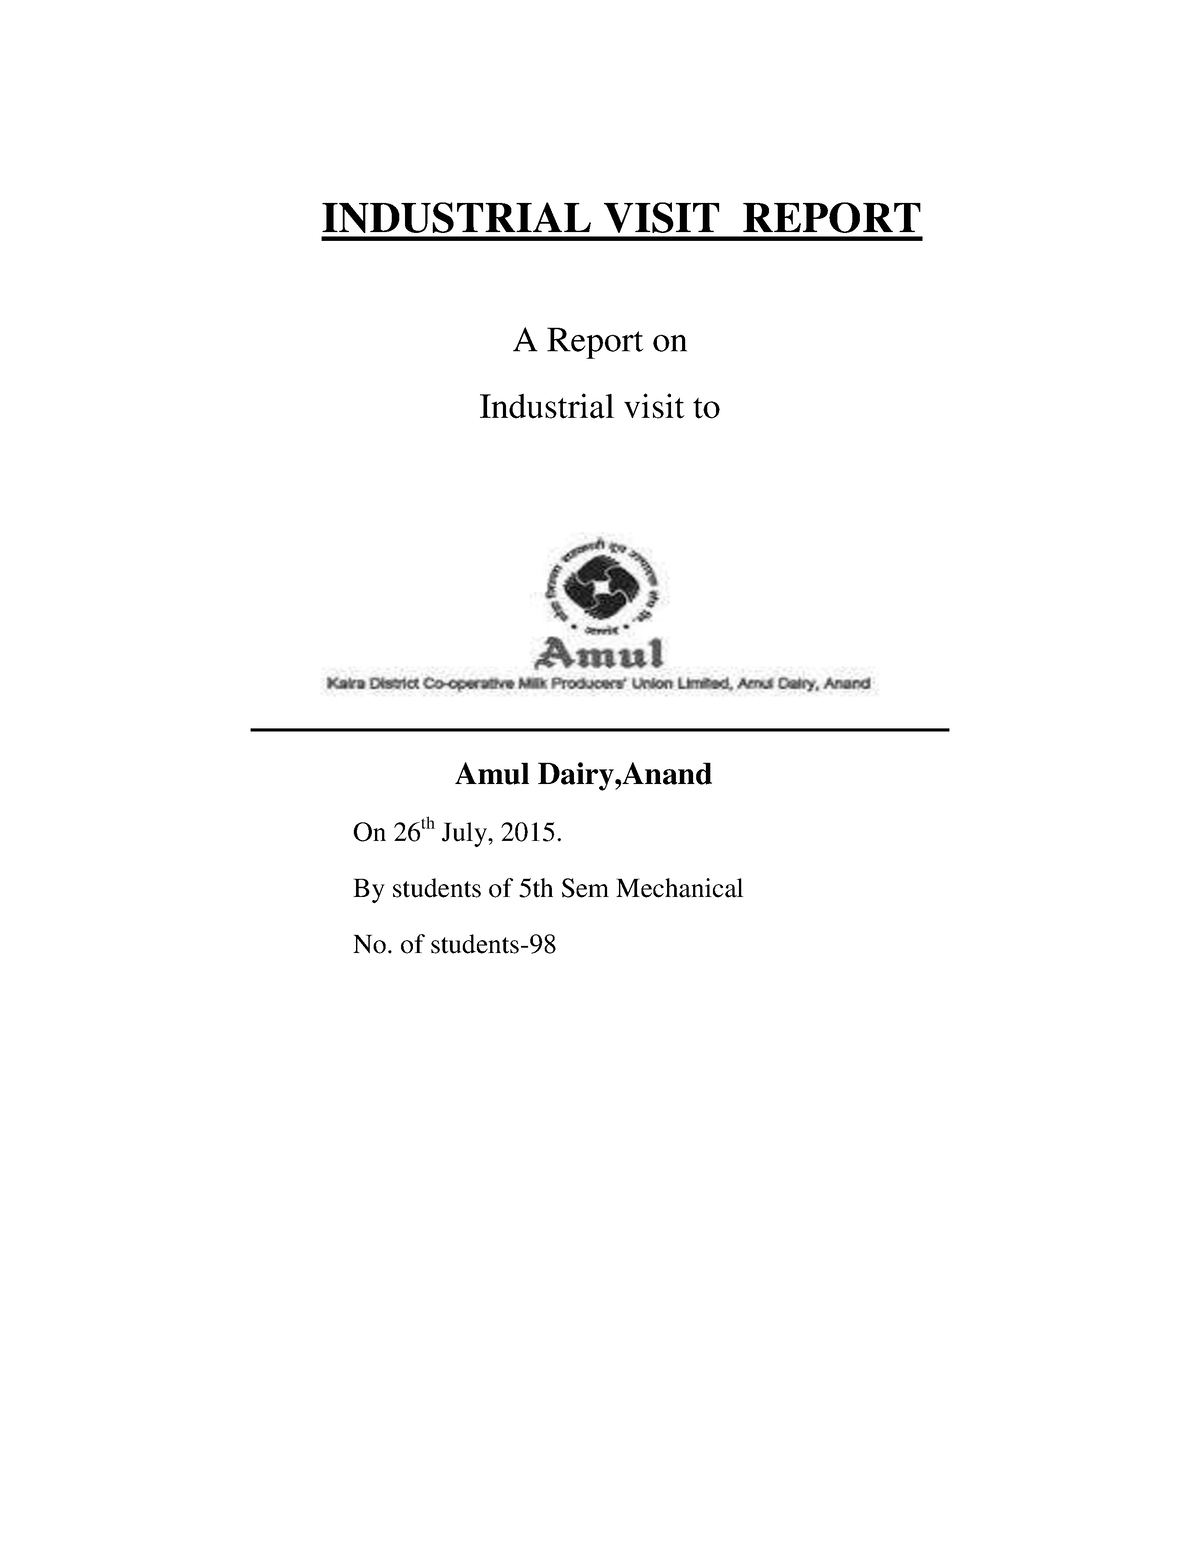 report on industrial visit by students